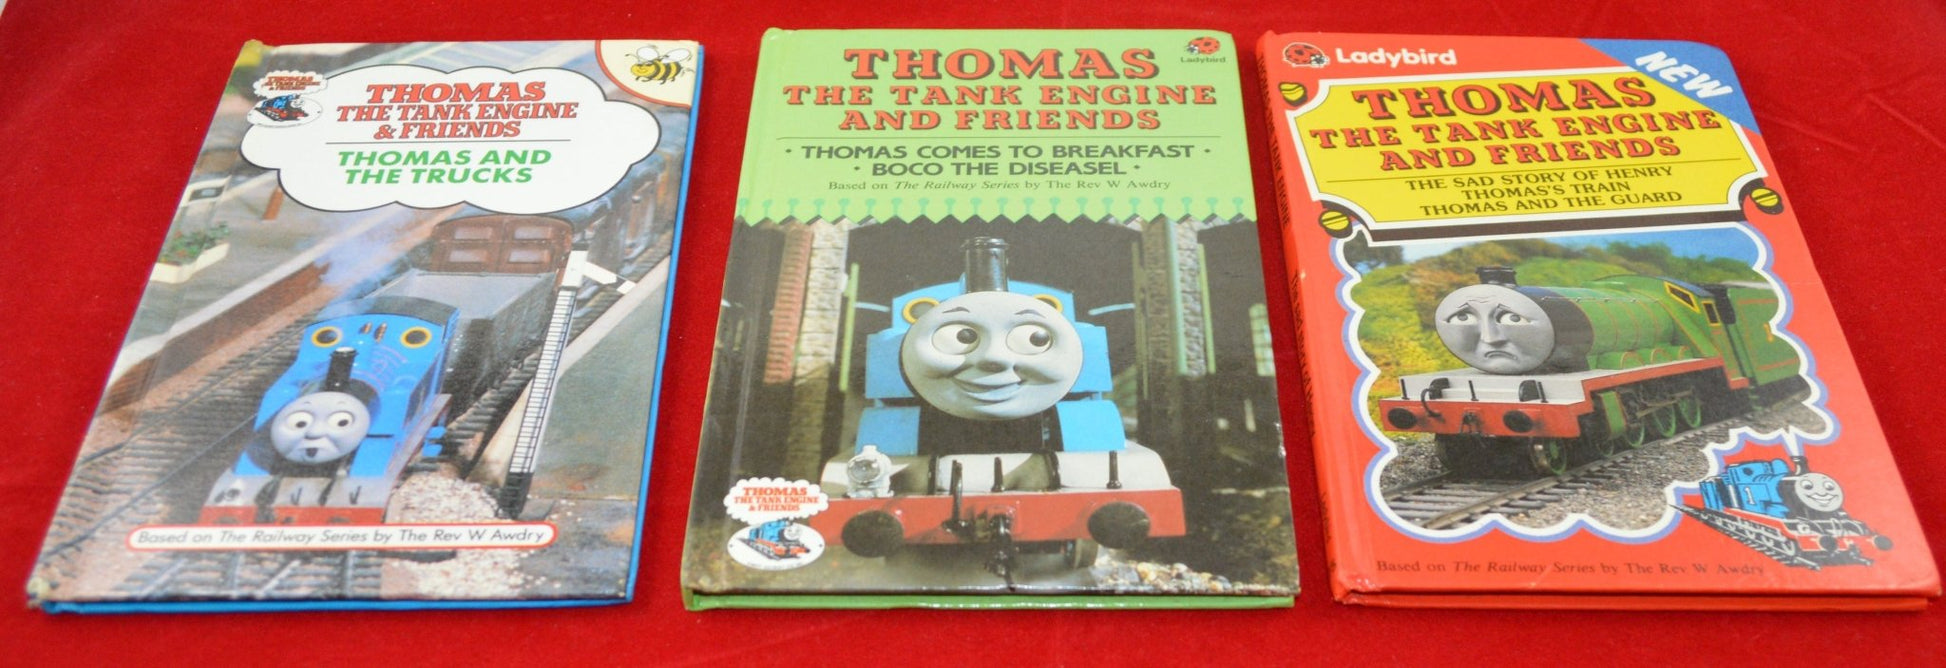 CHILDREN’S BOOKS THOMAS THE TANK ENGINE(PREVIOUSLY OWNED)GOOD CONDITION - TMD167207